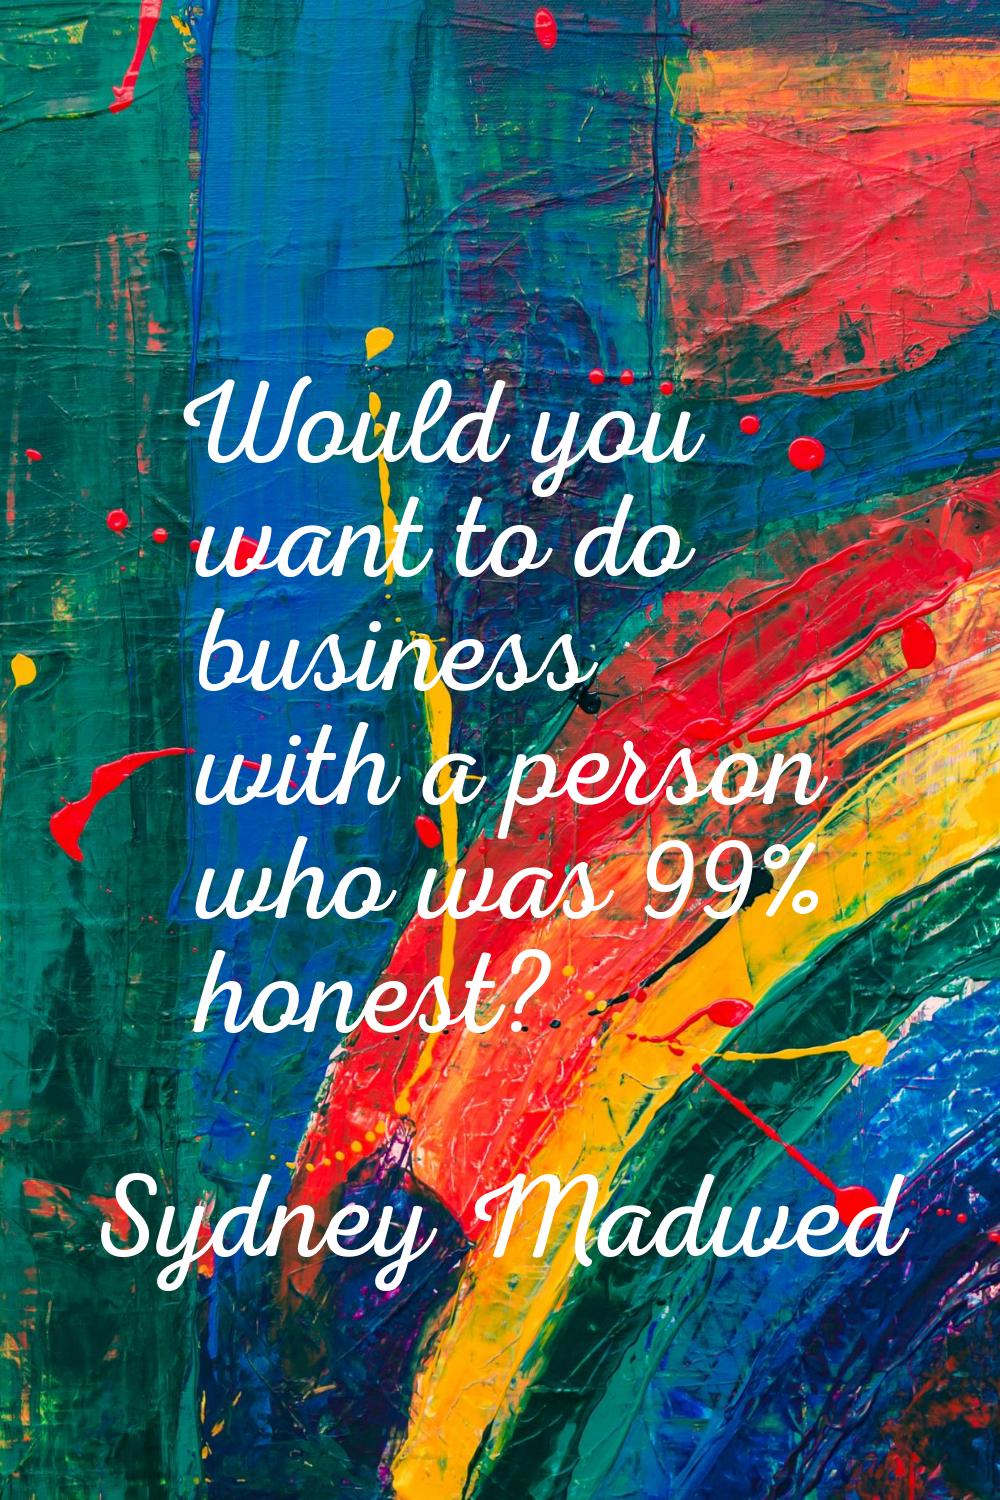 Would you want to do business with a person who was 99% honest?